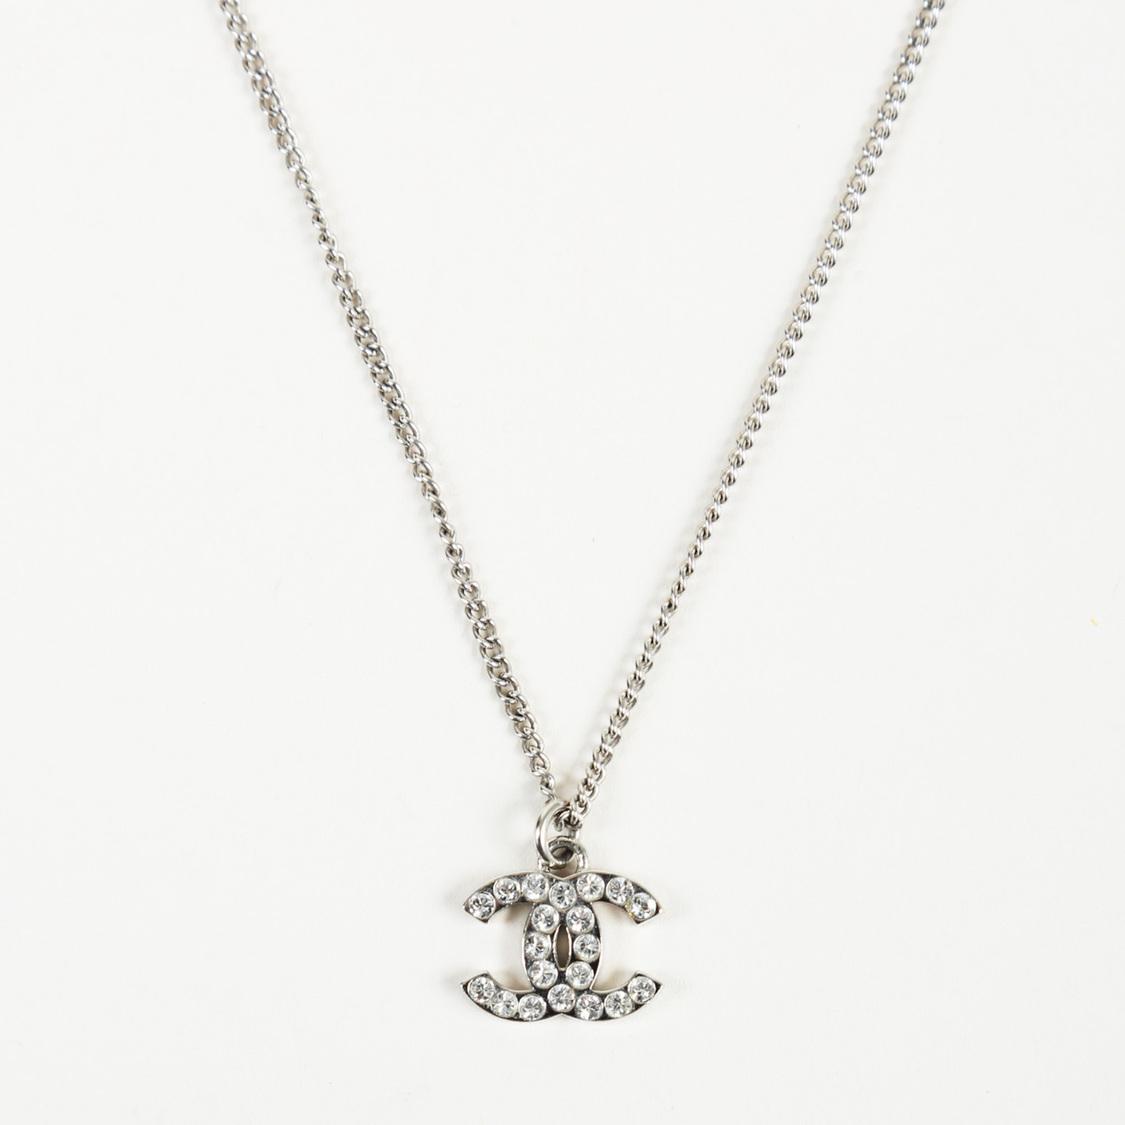 Chanel Cc Crystal Pendant Necklace in 